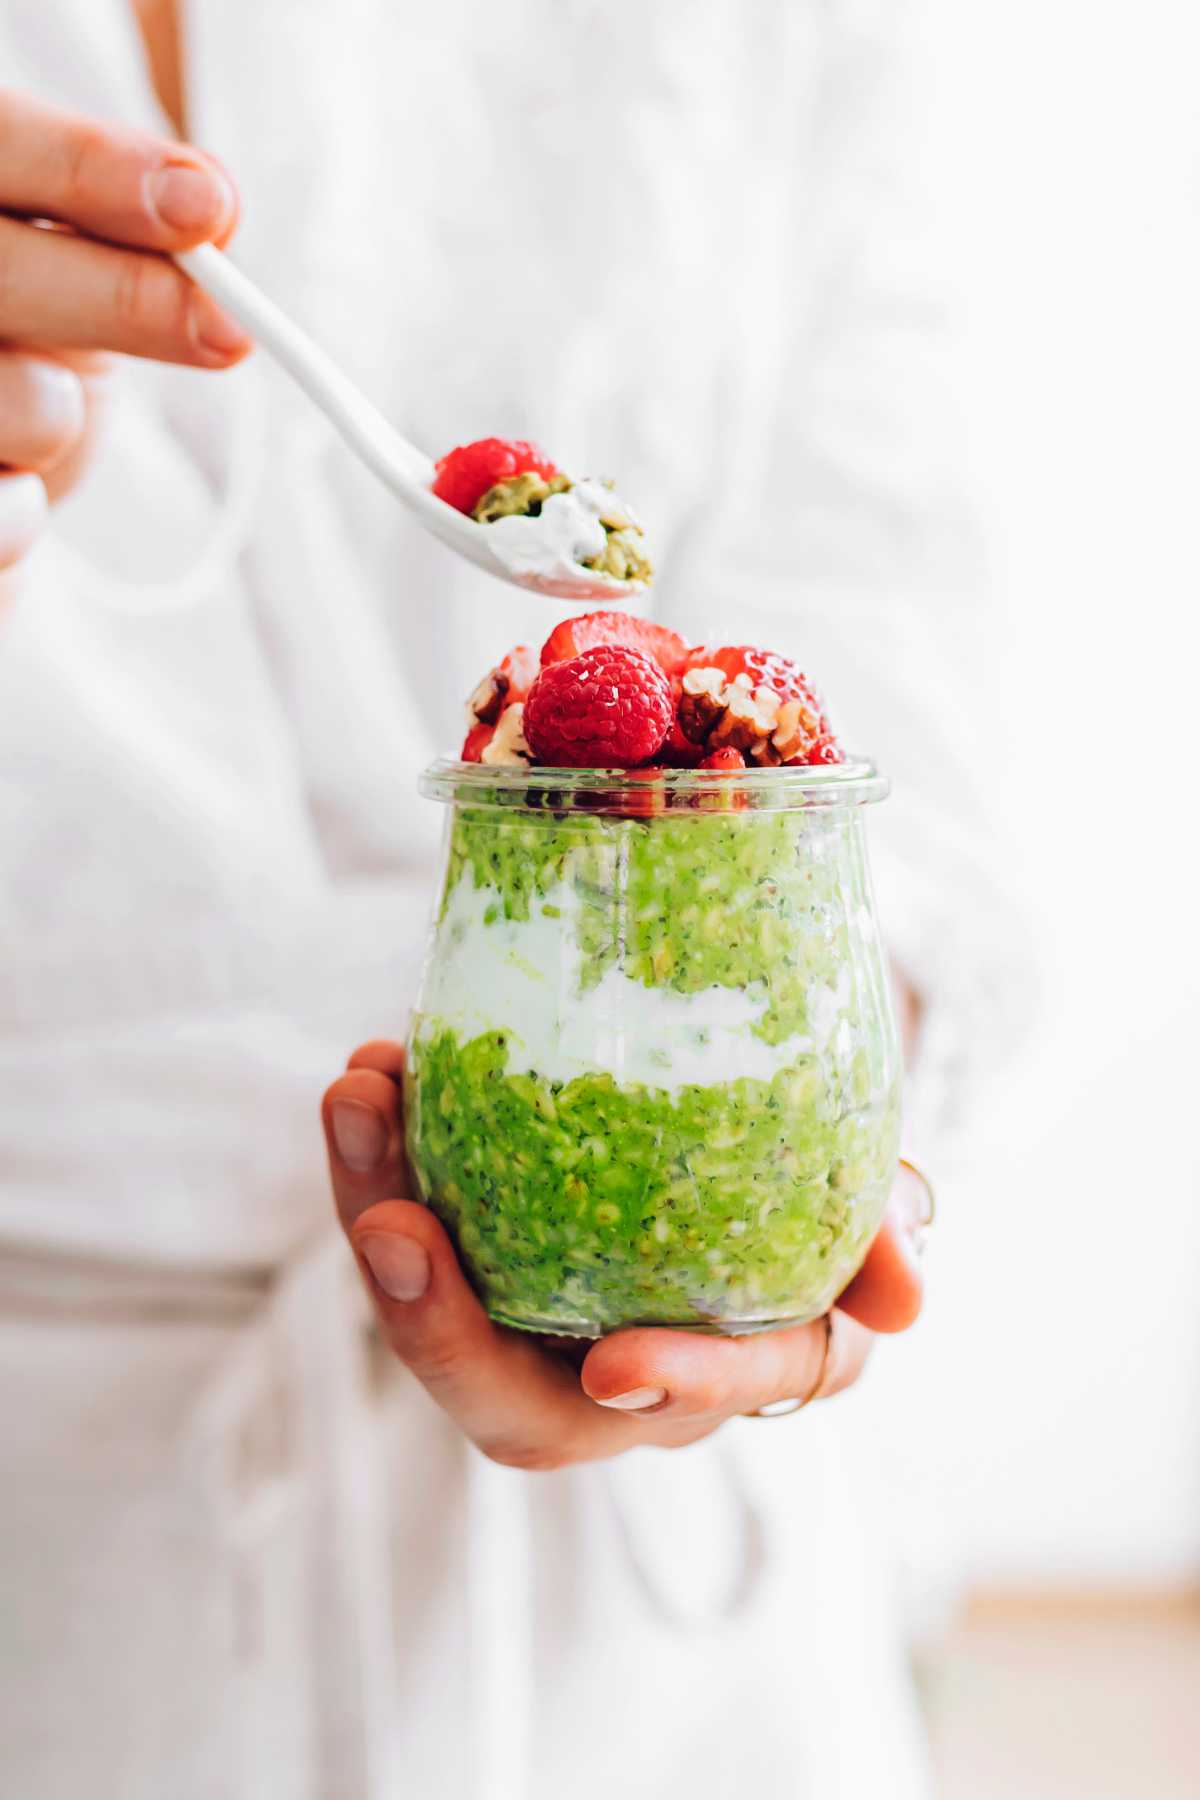 holding a jar of matcha oats with berries